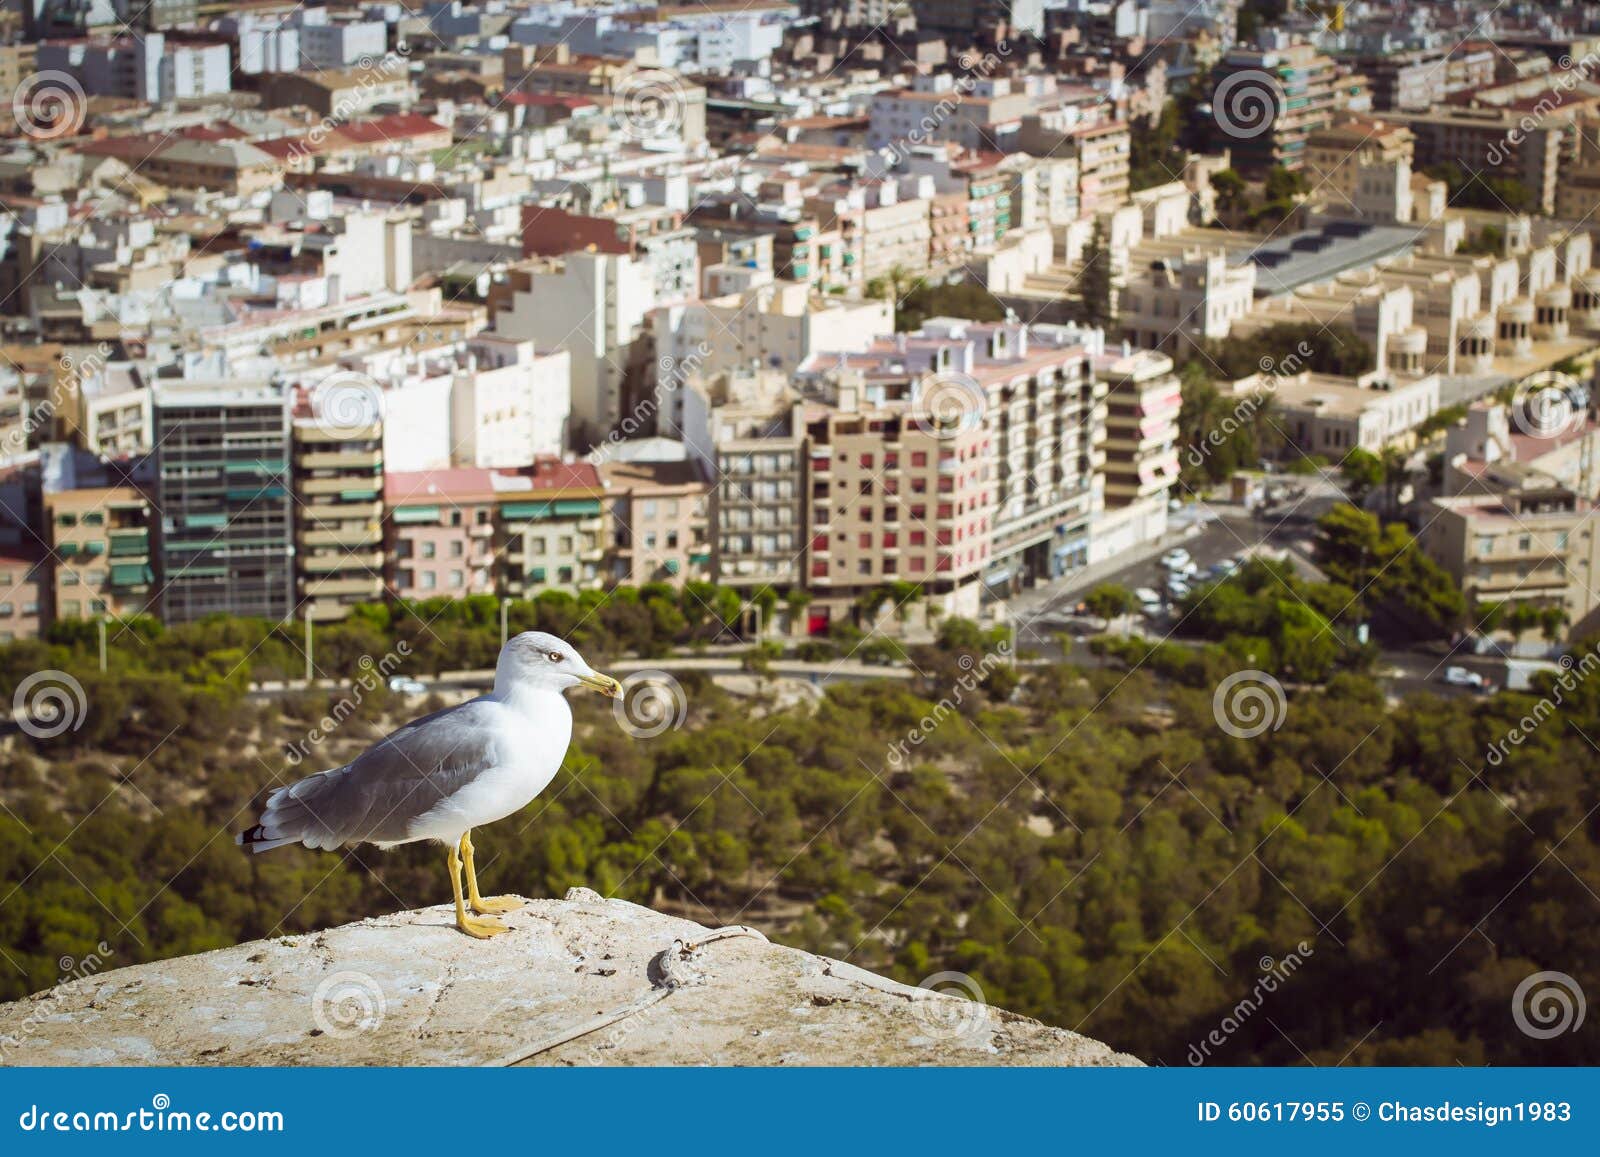 Seagull in the castle Santa Barbara, Alicante. ALICANTE, SPAIN - SEPTEMBER 9, 2014: Seagull sitting on the ramparts, on the background of the city of Alicante, the castle Santa Barbara, Alicante, Valencia, Spain